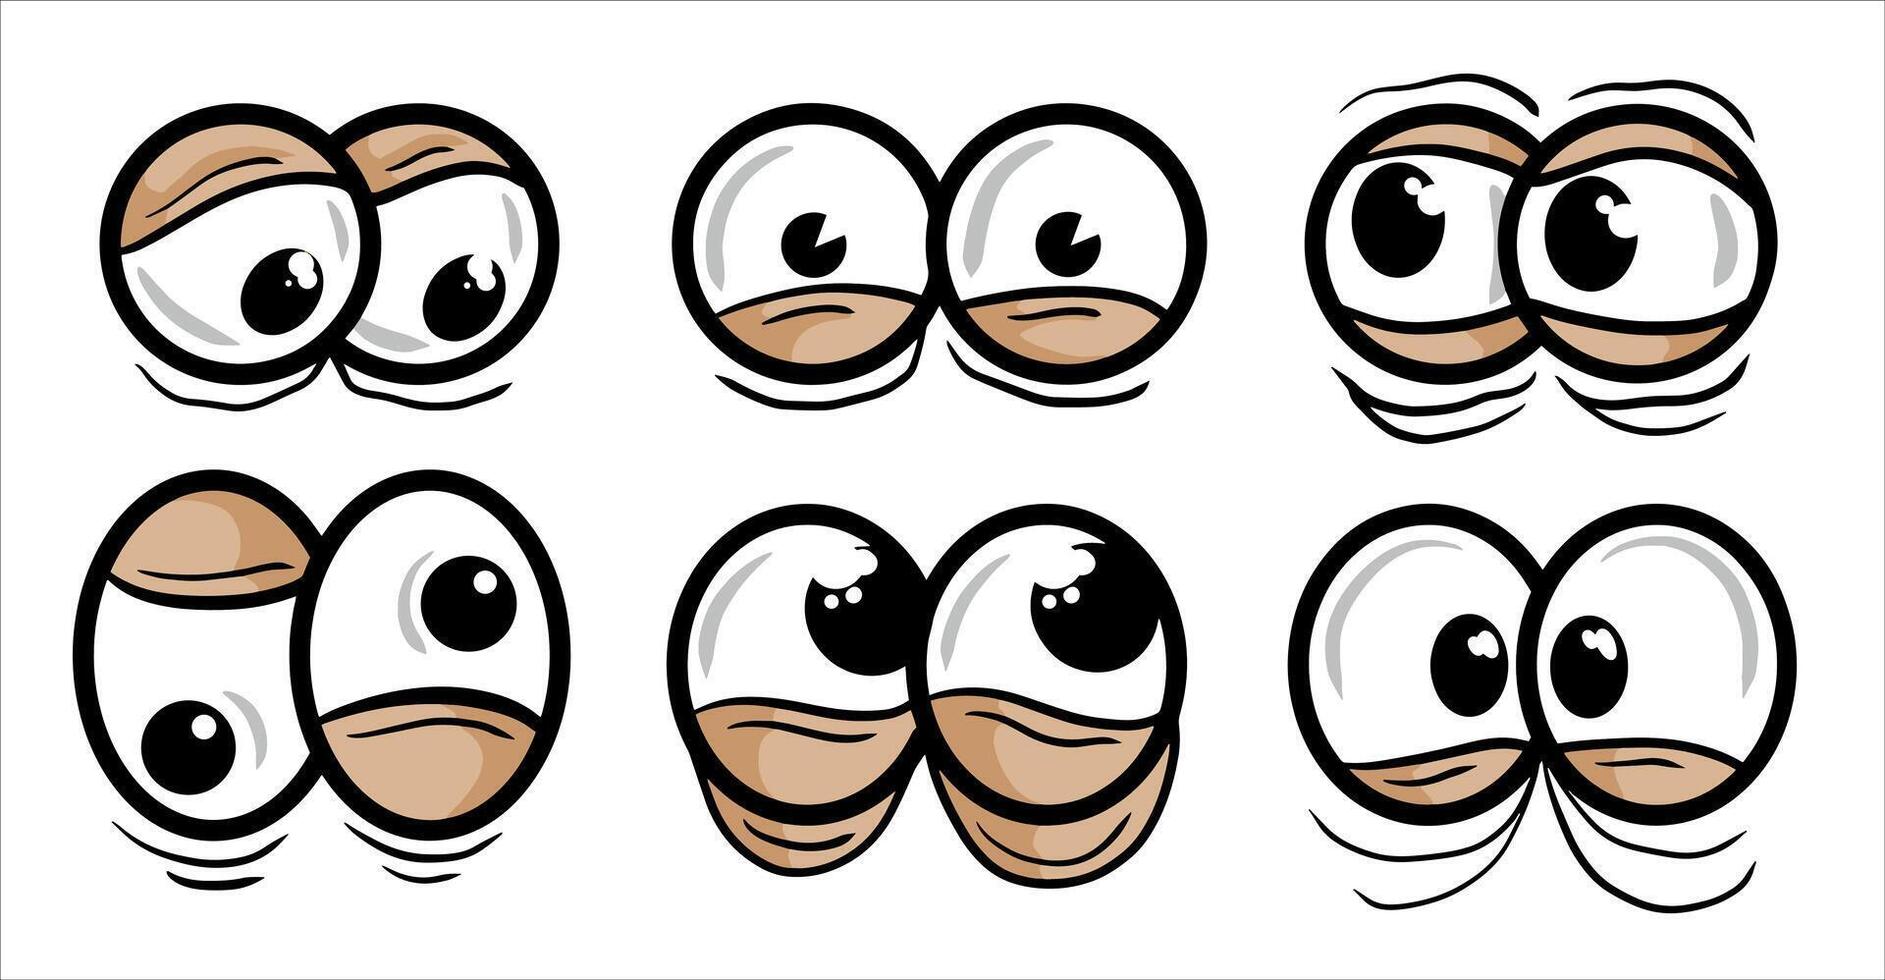 Tired Eye comic view. Black cute funny eyesight. Set of Surprised, angry and mad expression isolated on white background vector